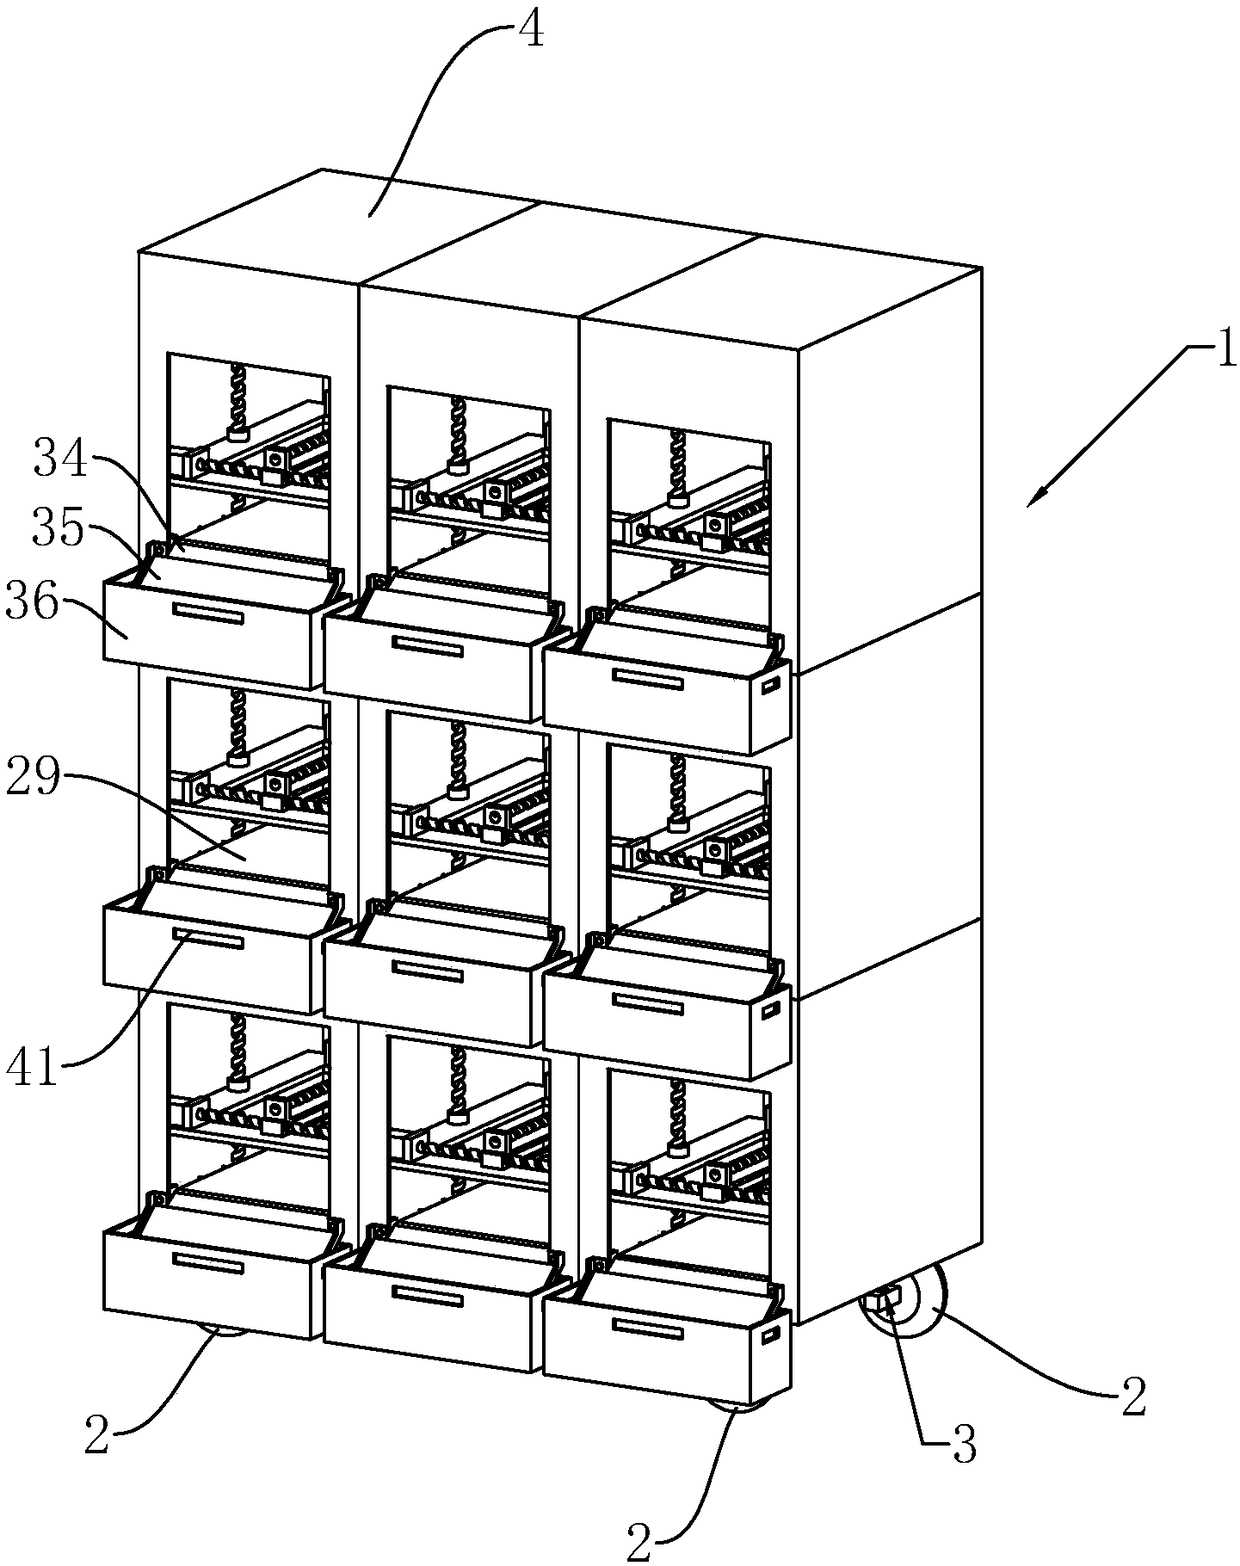 Multi-unit 3D printing manufacturing system capable of achieving continuous production